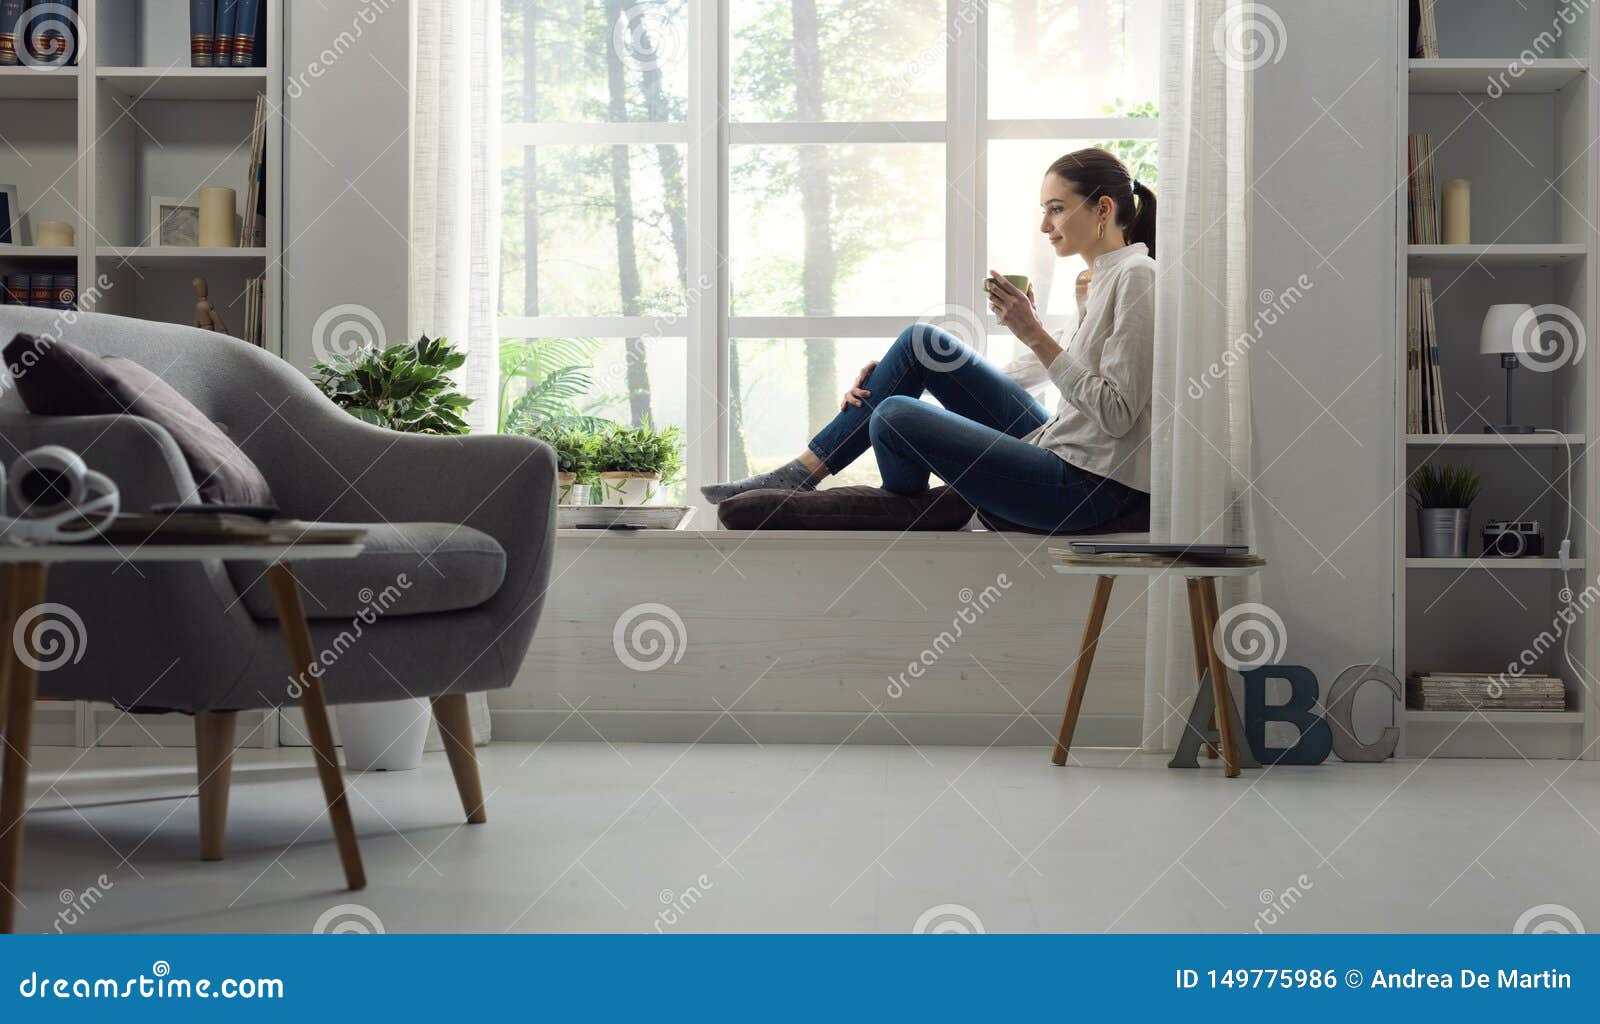 woman relaxing at home and having coffee